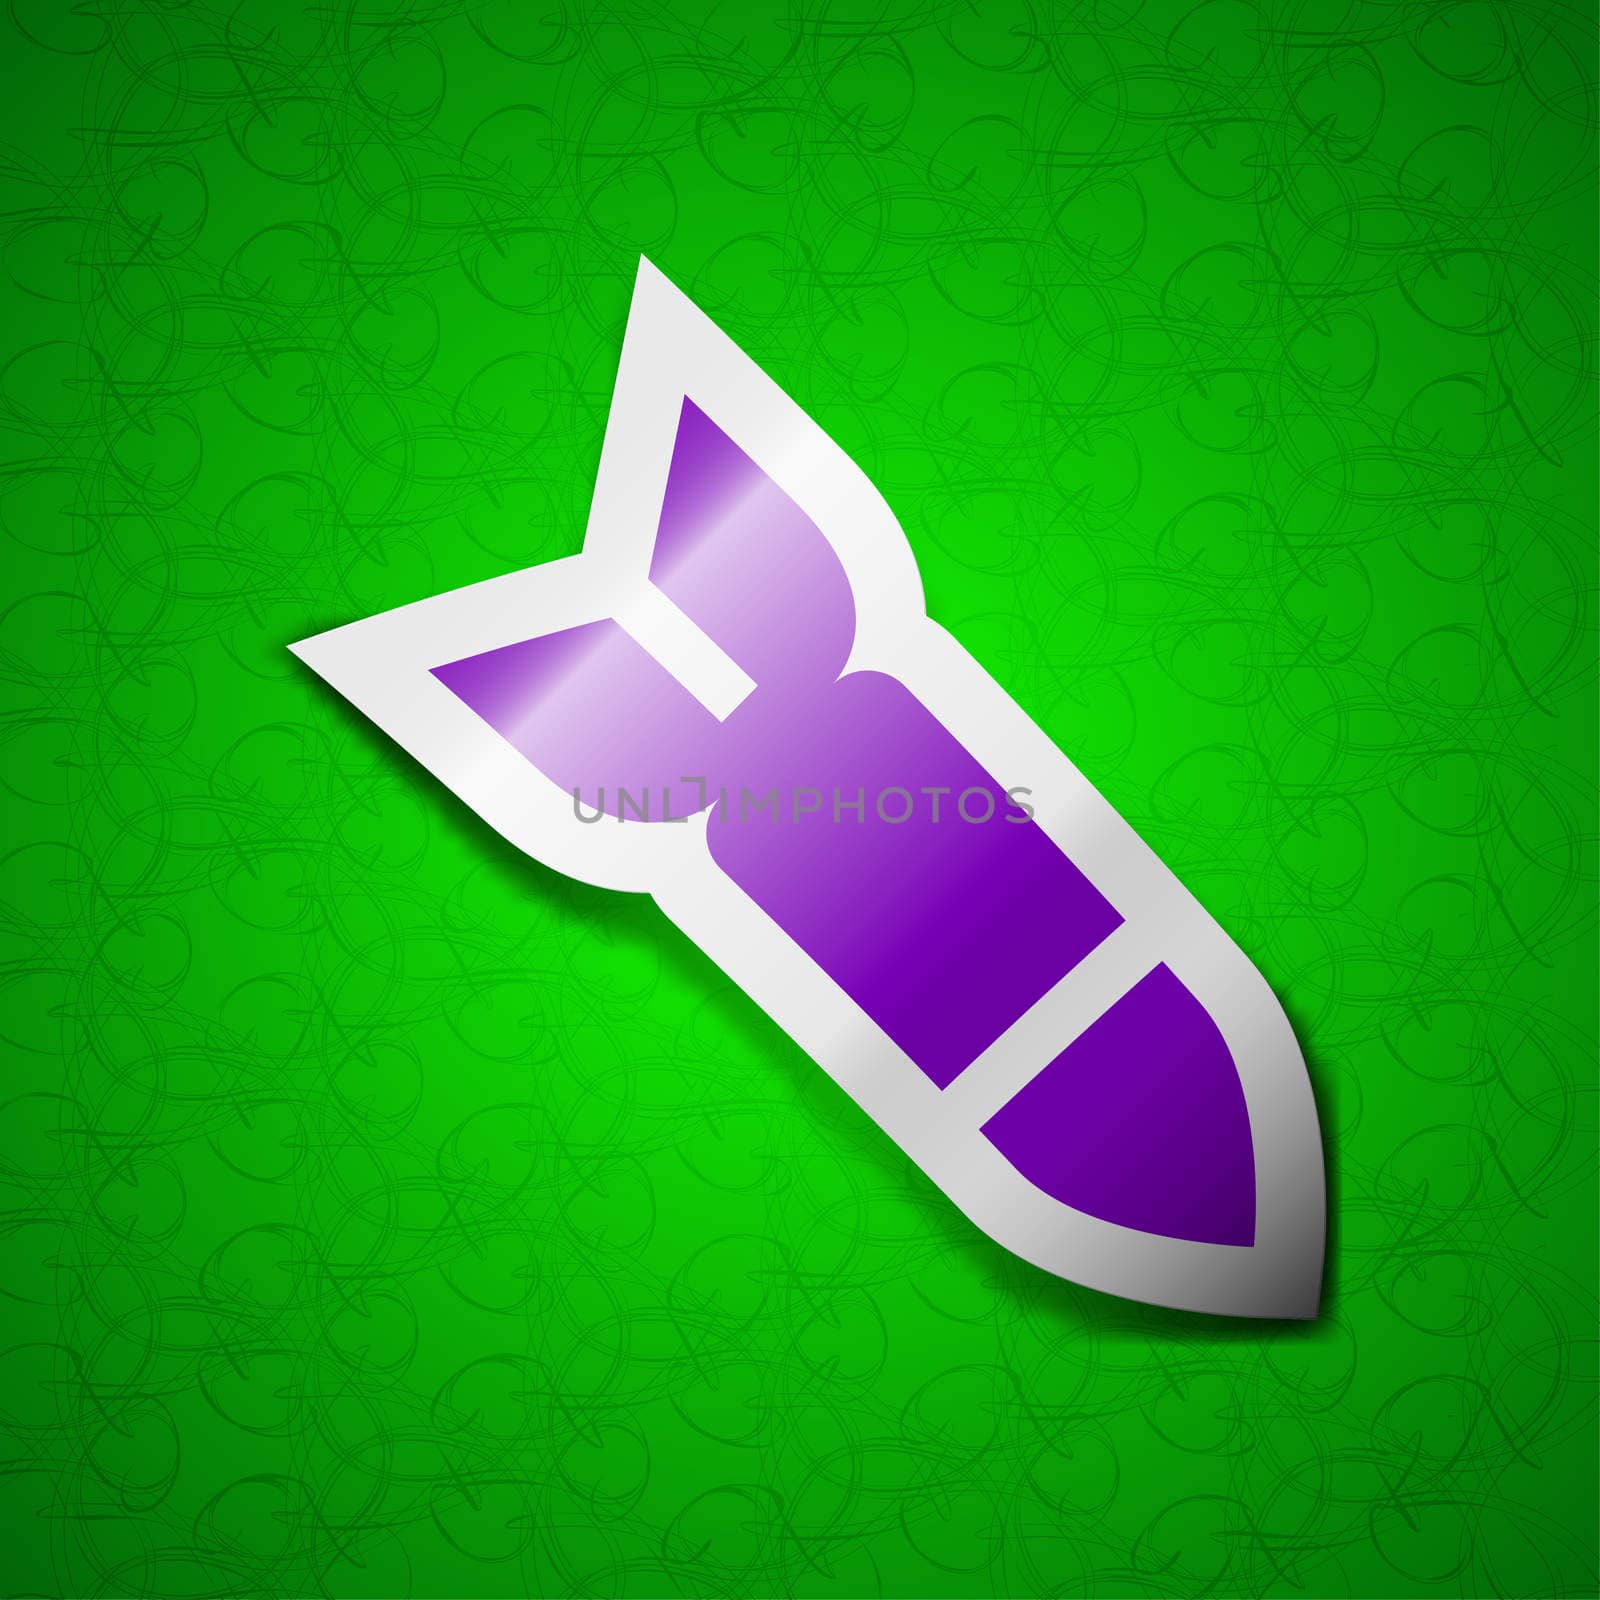 Missile,Rocket weapon icon sign. Symbol chic colored sticky label on green background. illustration